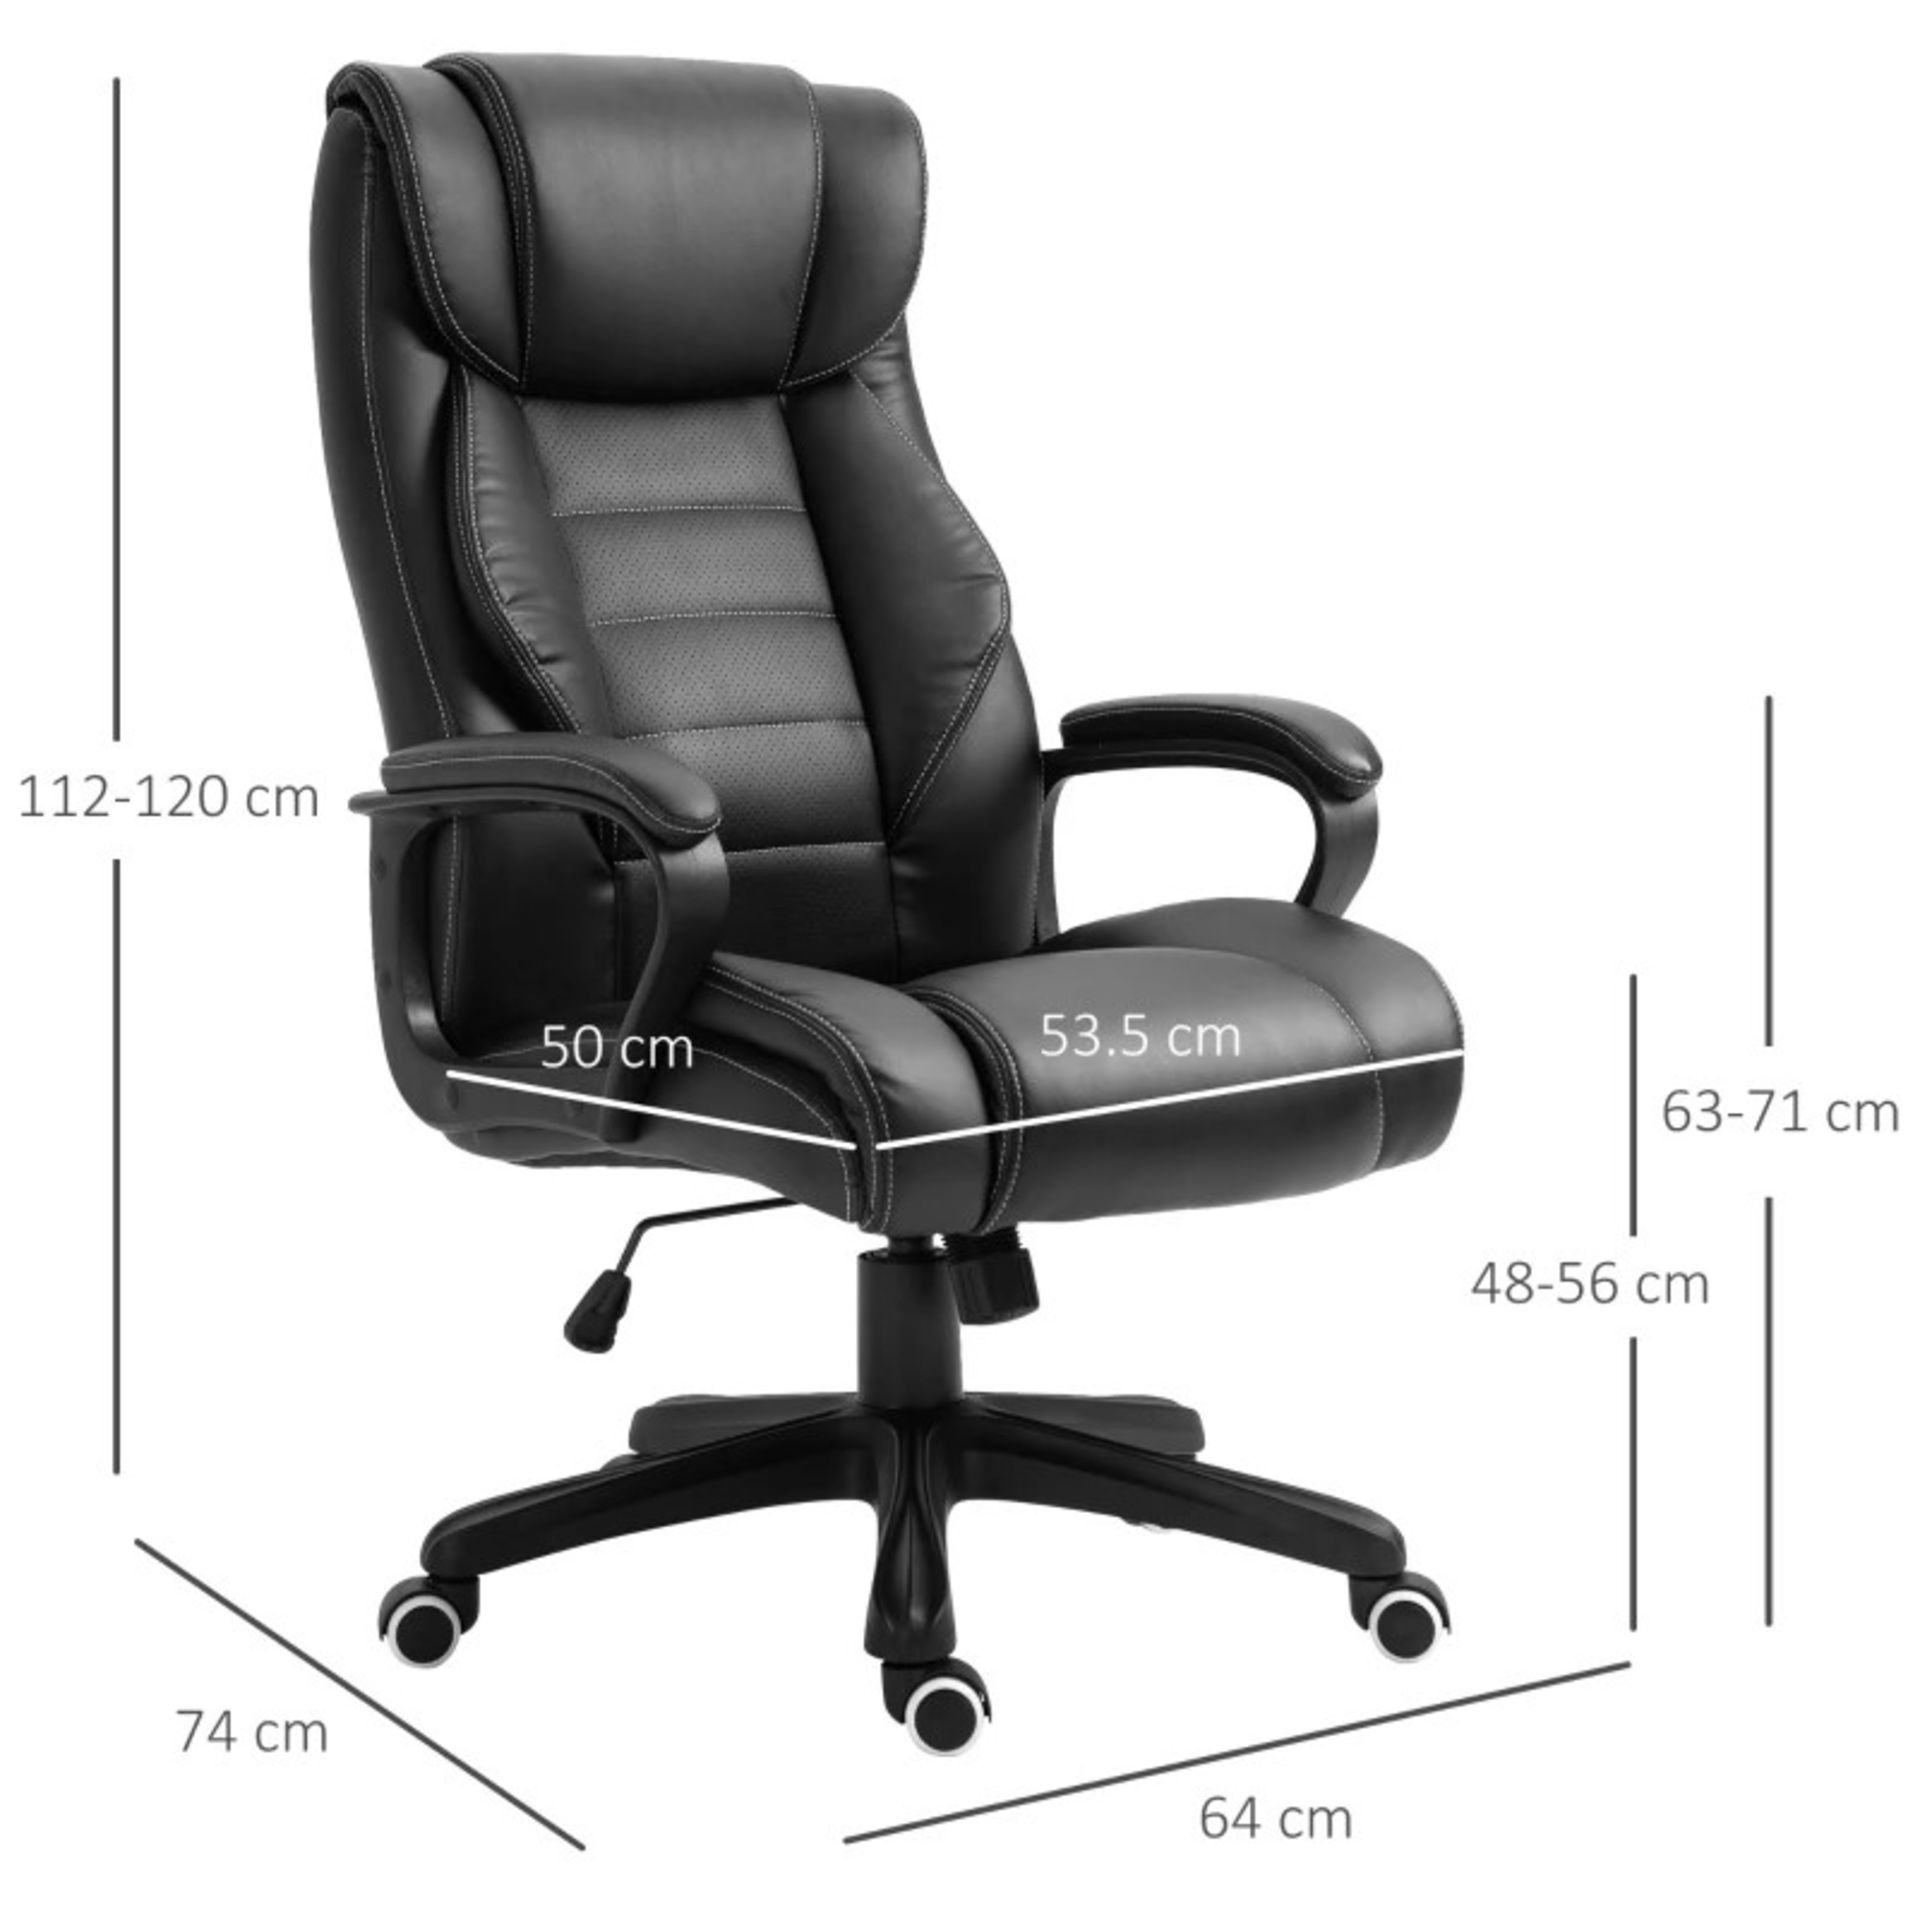 RRP £184.99 - Faux Leather Massage Executive Office Chair - Black - Five wheels: The swivel chair is - Image 3 of 4